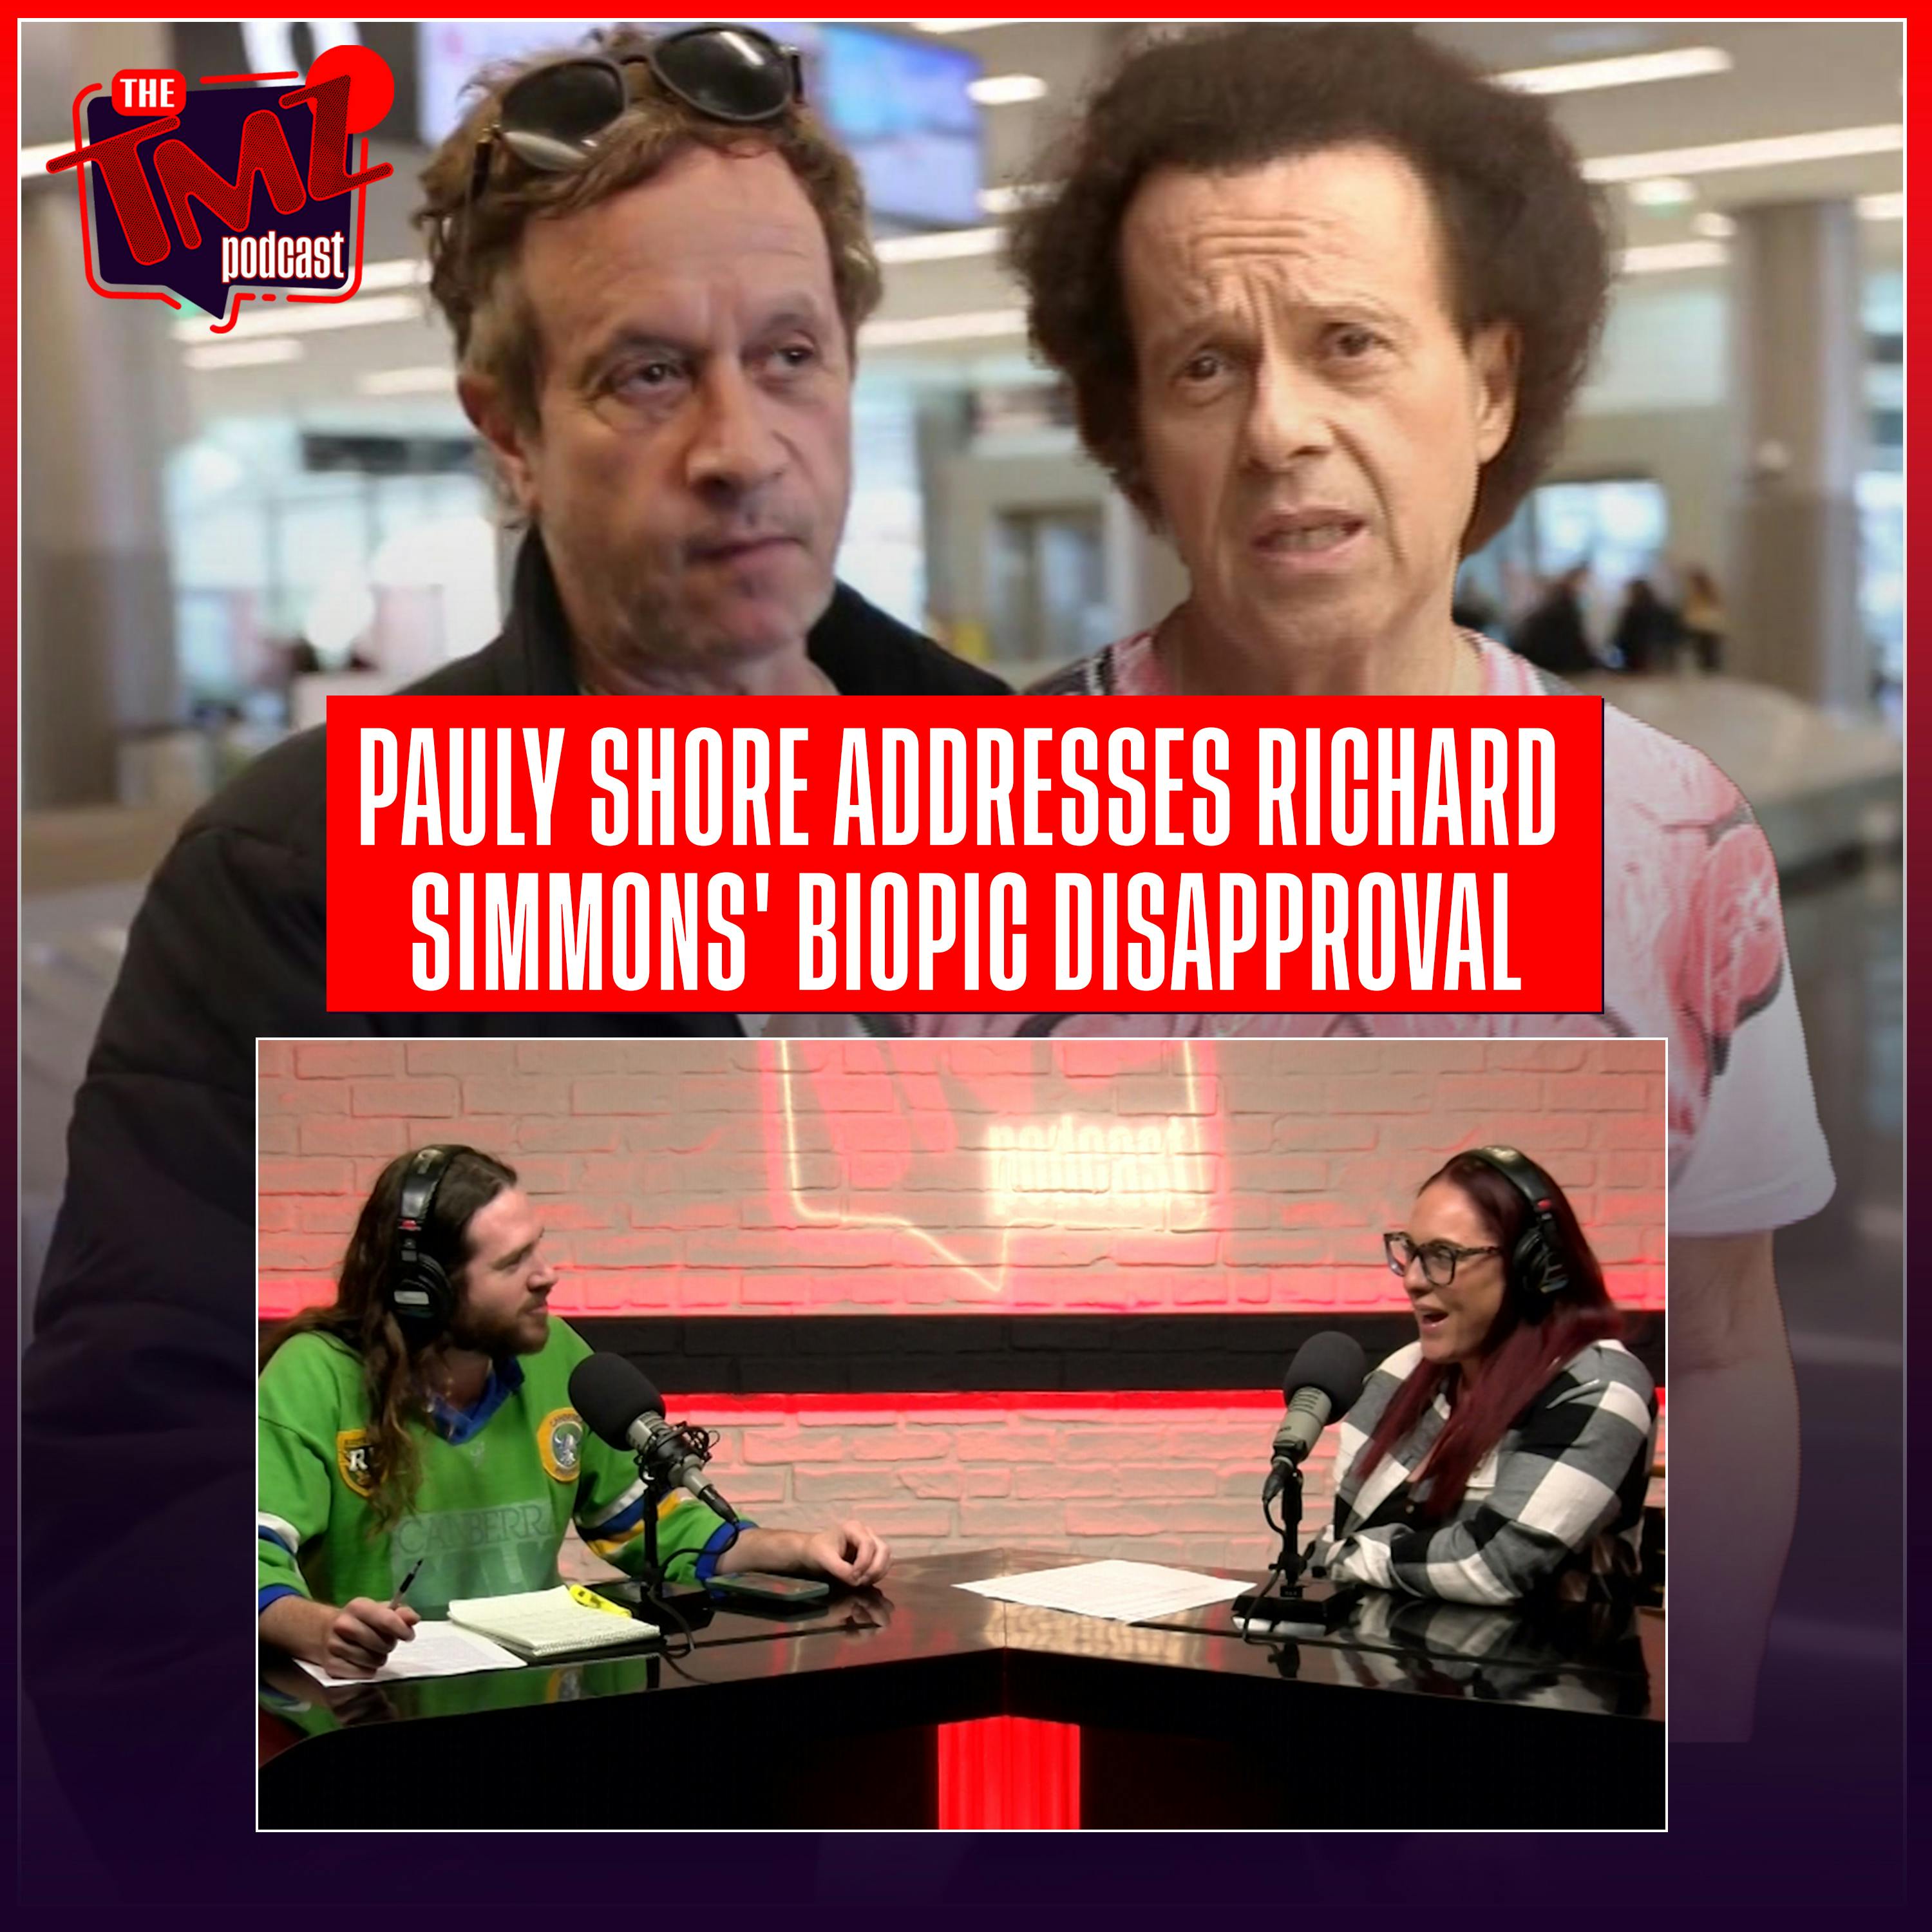 Pauly Shore Addresses Richard Simmons' Disapproval Of Biopic